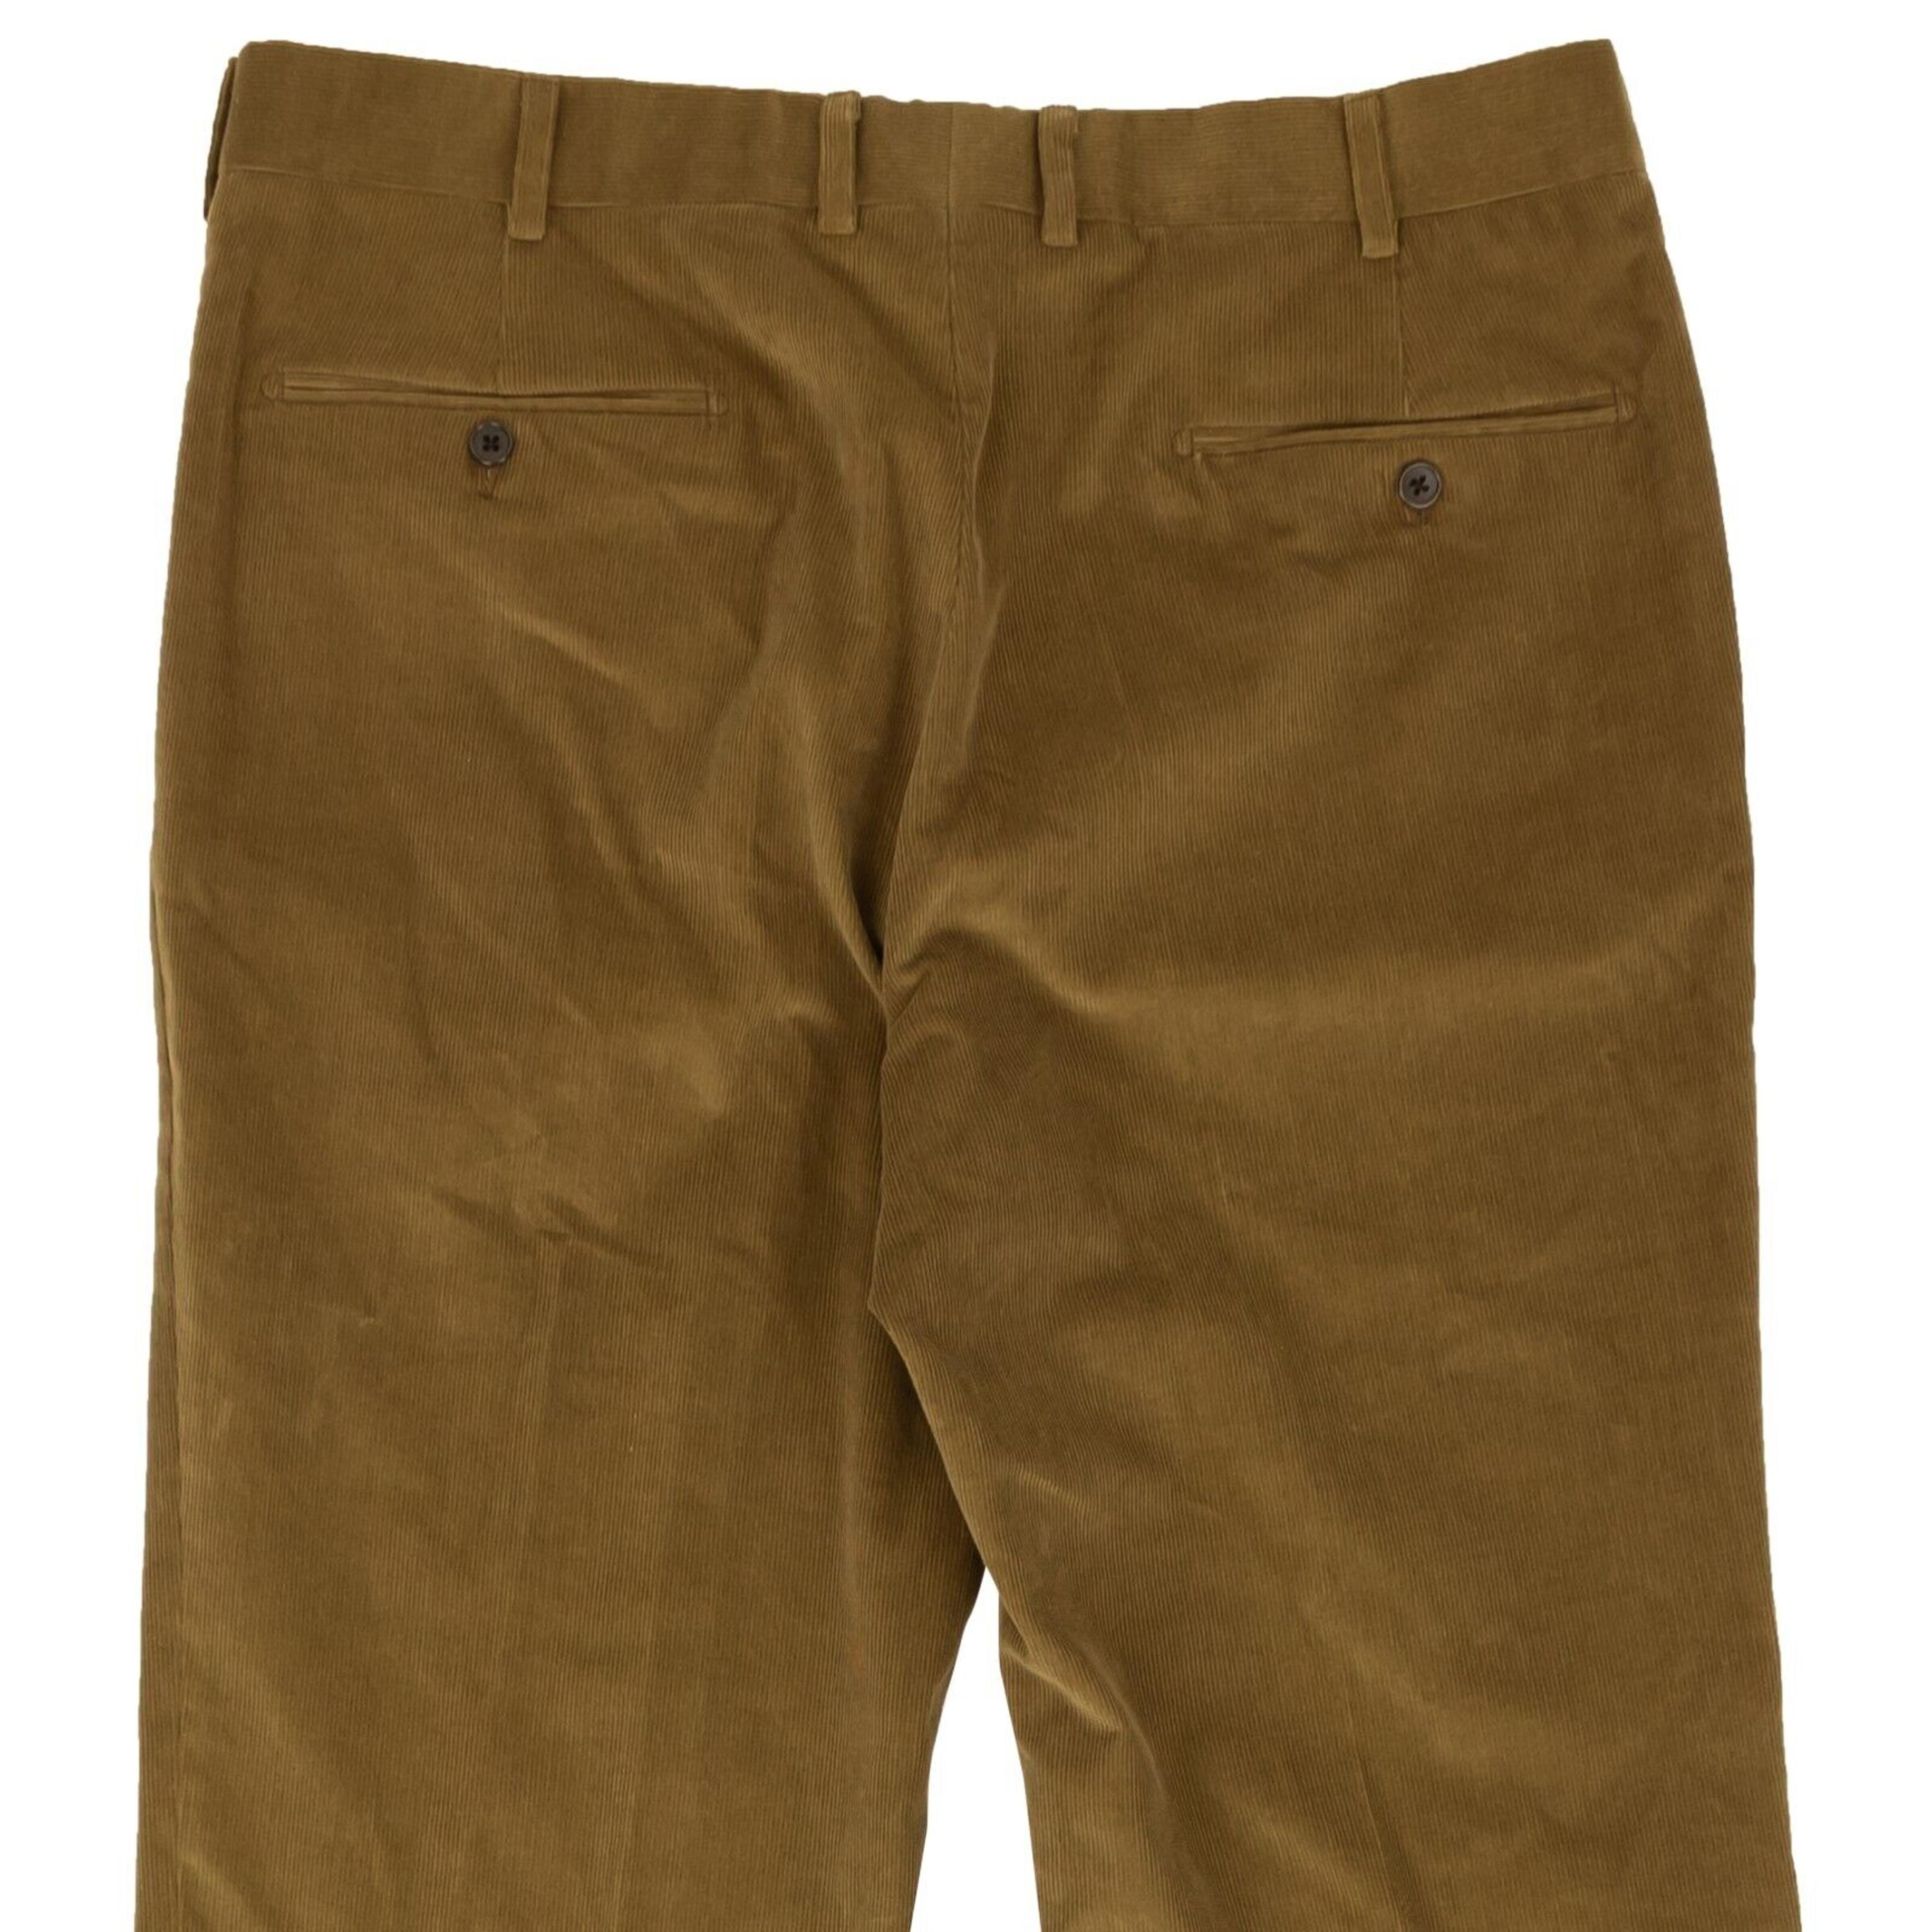 Alternate View 4 of Brown Cotton Blend Corduroy Casual Pants